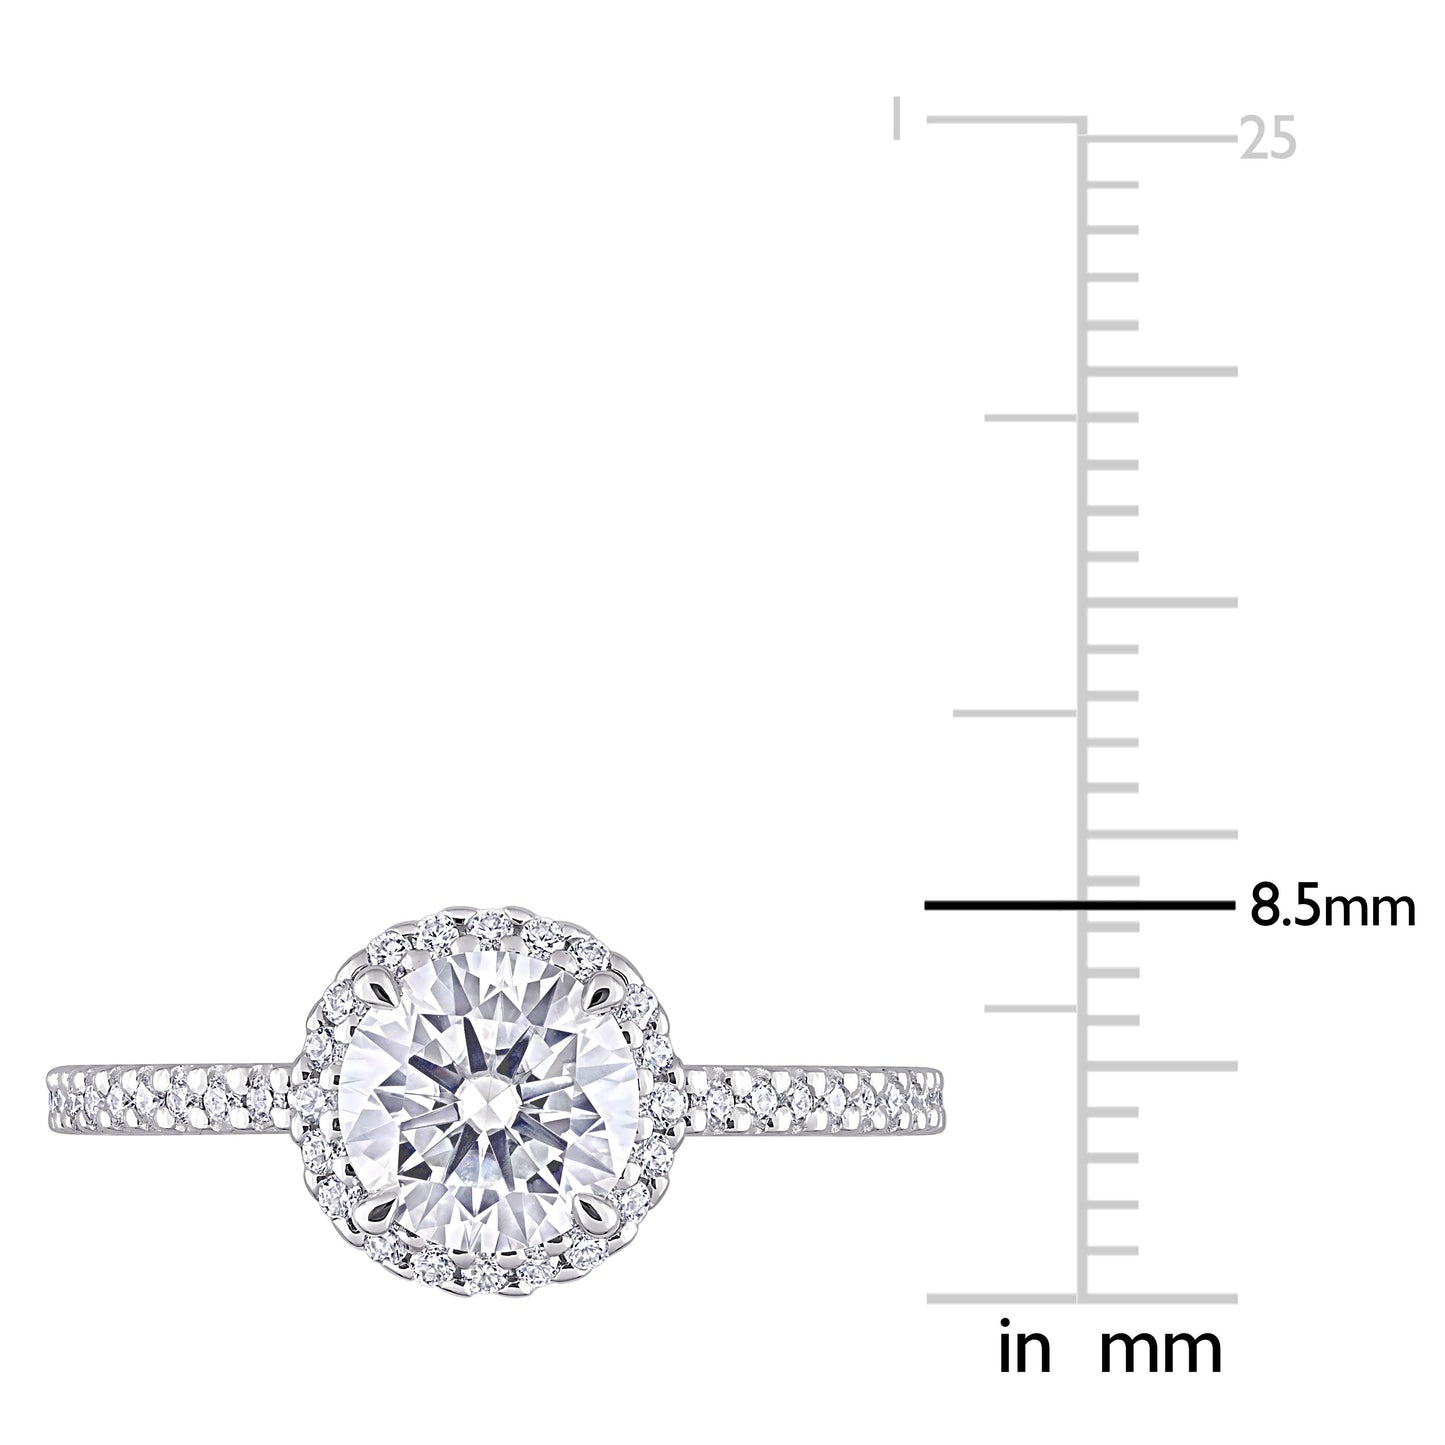 1 1/4ct Round Cut Moissanite Halo Ring in Sterling Silver